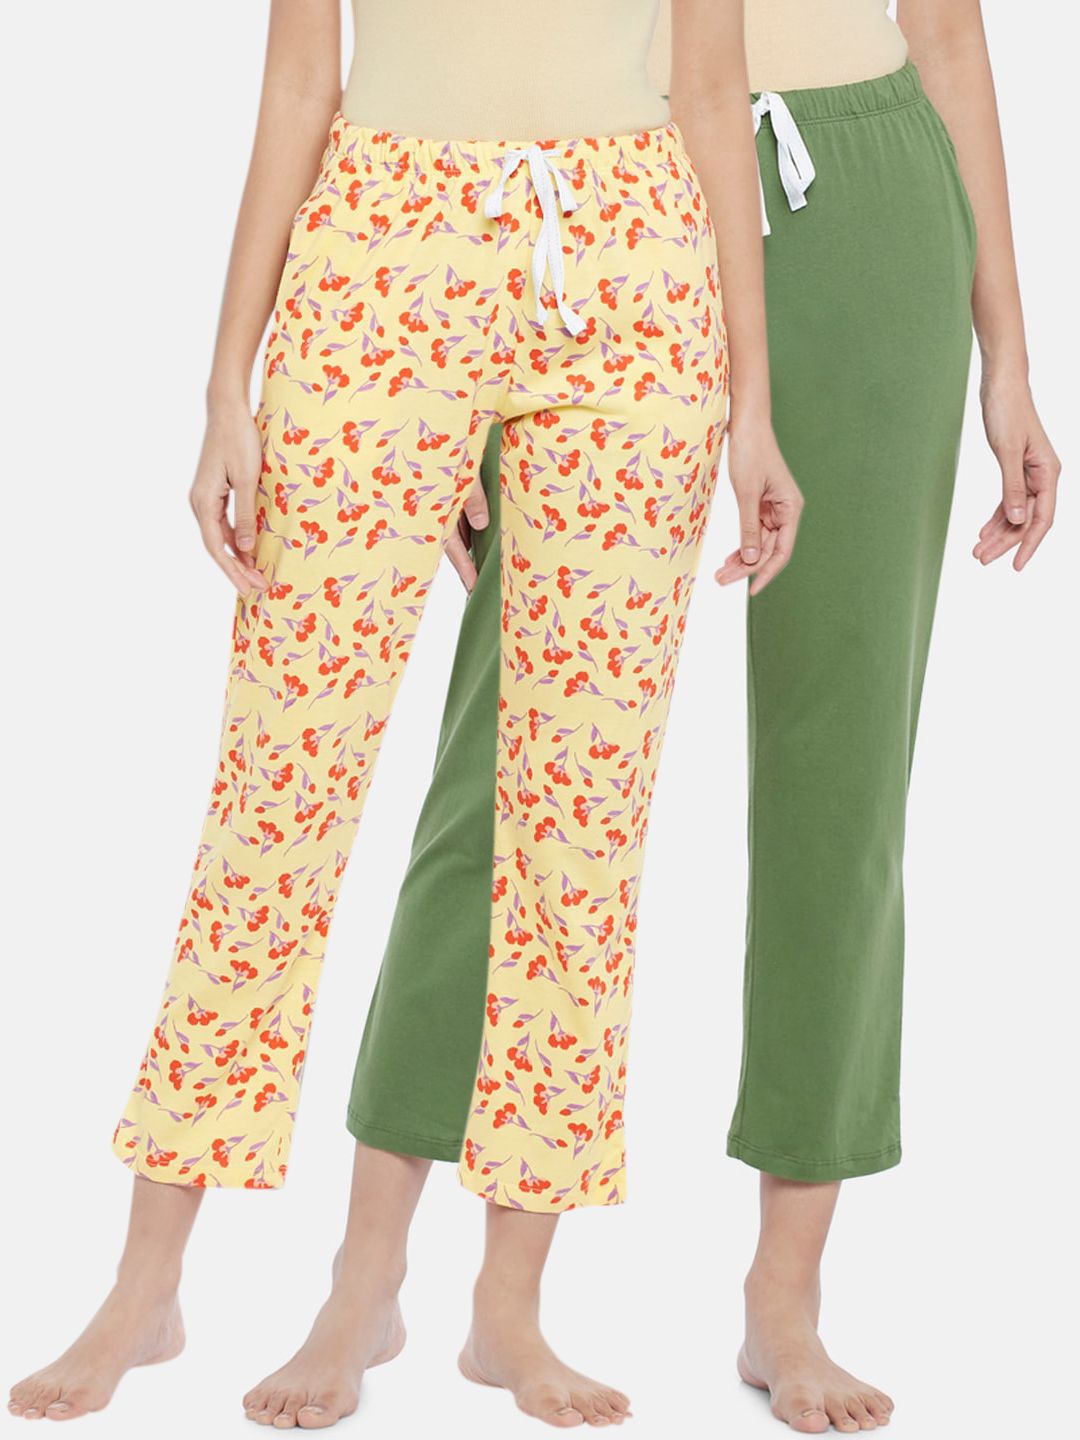 Dreamz by Pantaloons Women Set of 2 Yellow & Green Printed Cotton Lounge Pants Price in India